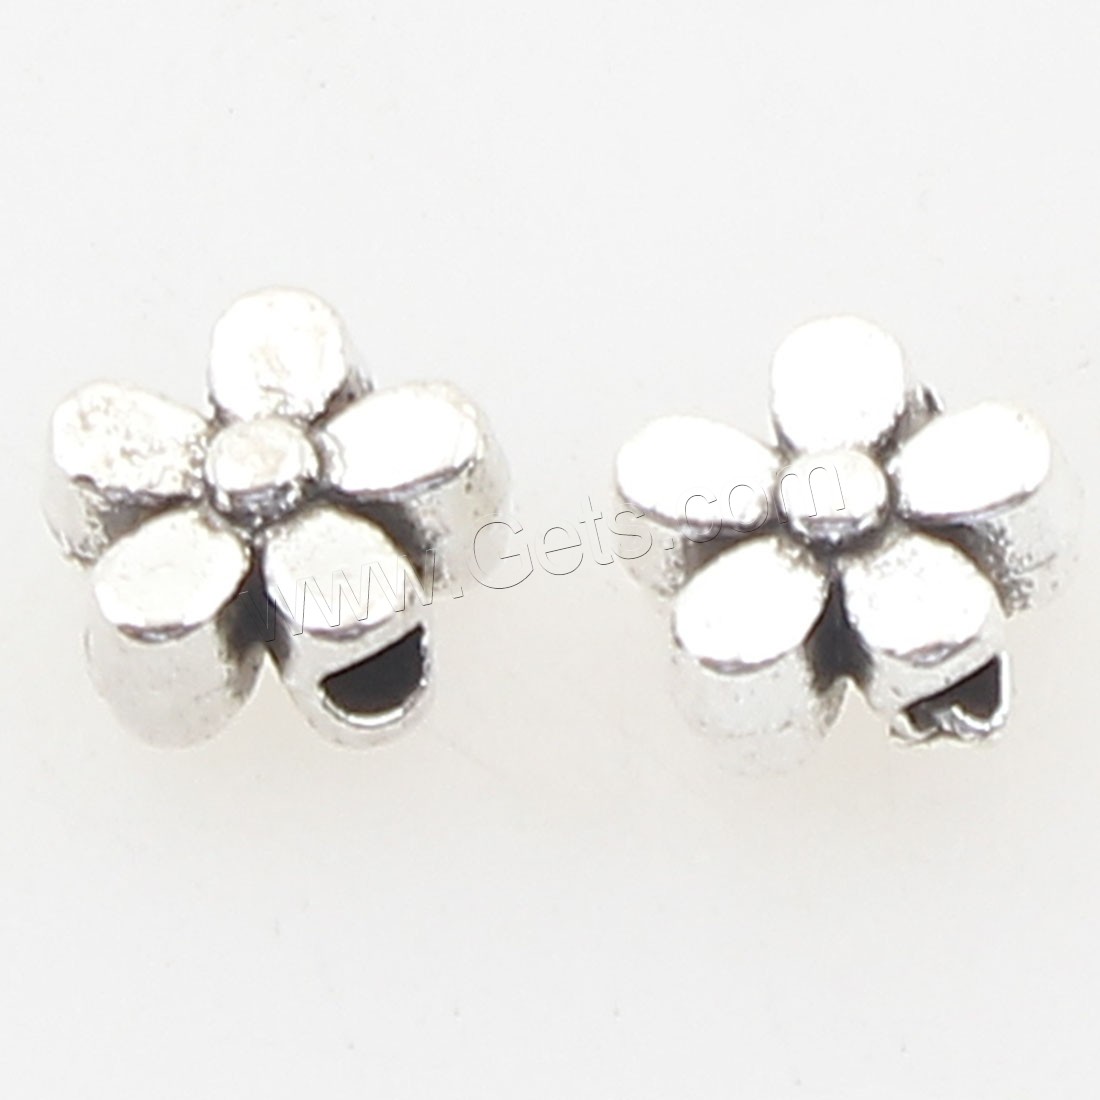 Zinc Alloy Flower Beads, antique silver color plated, 5x5x3mm, Hole:Approx 1mm, Approx 2500PCs/Bag, Sold By Bag